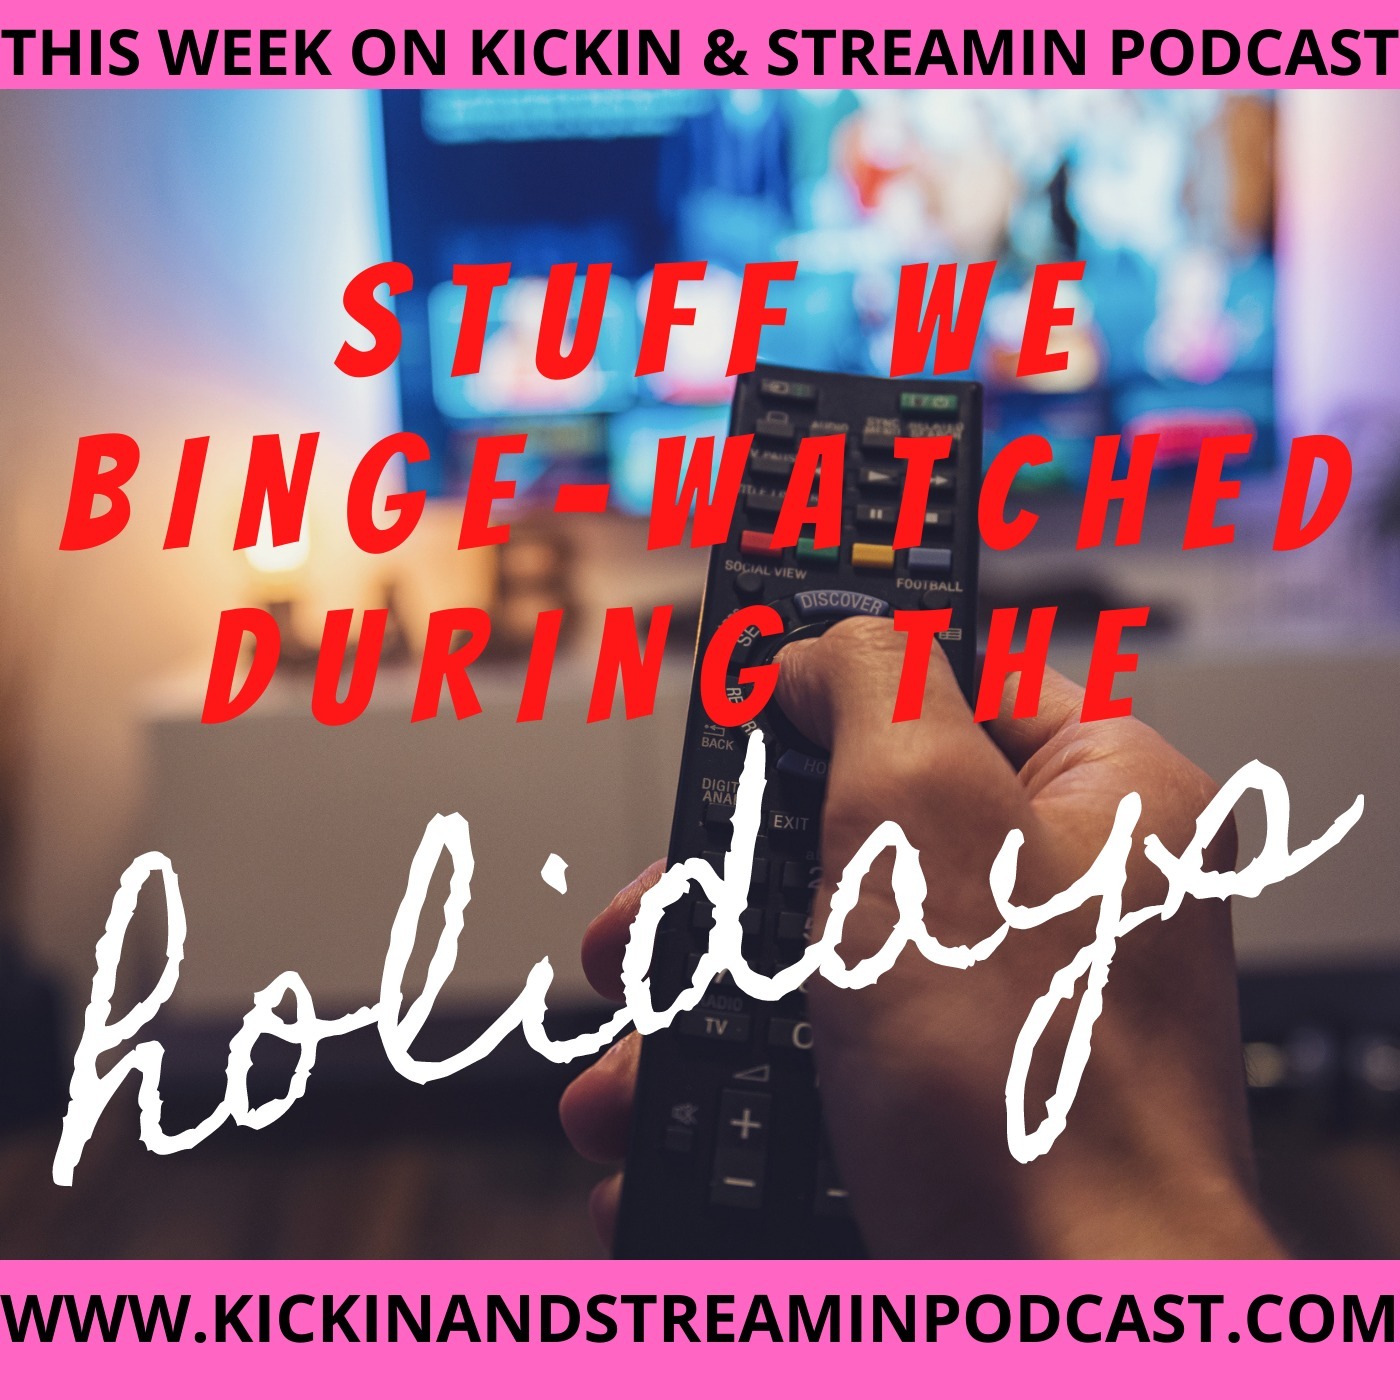 Stuff We Binge-watched During The Holidays